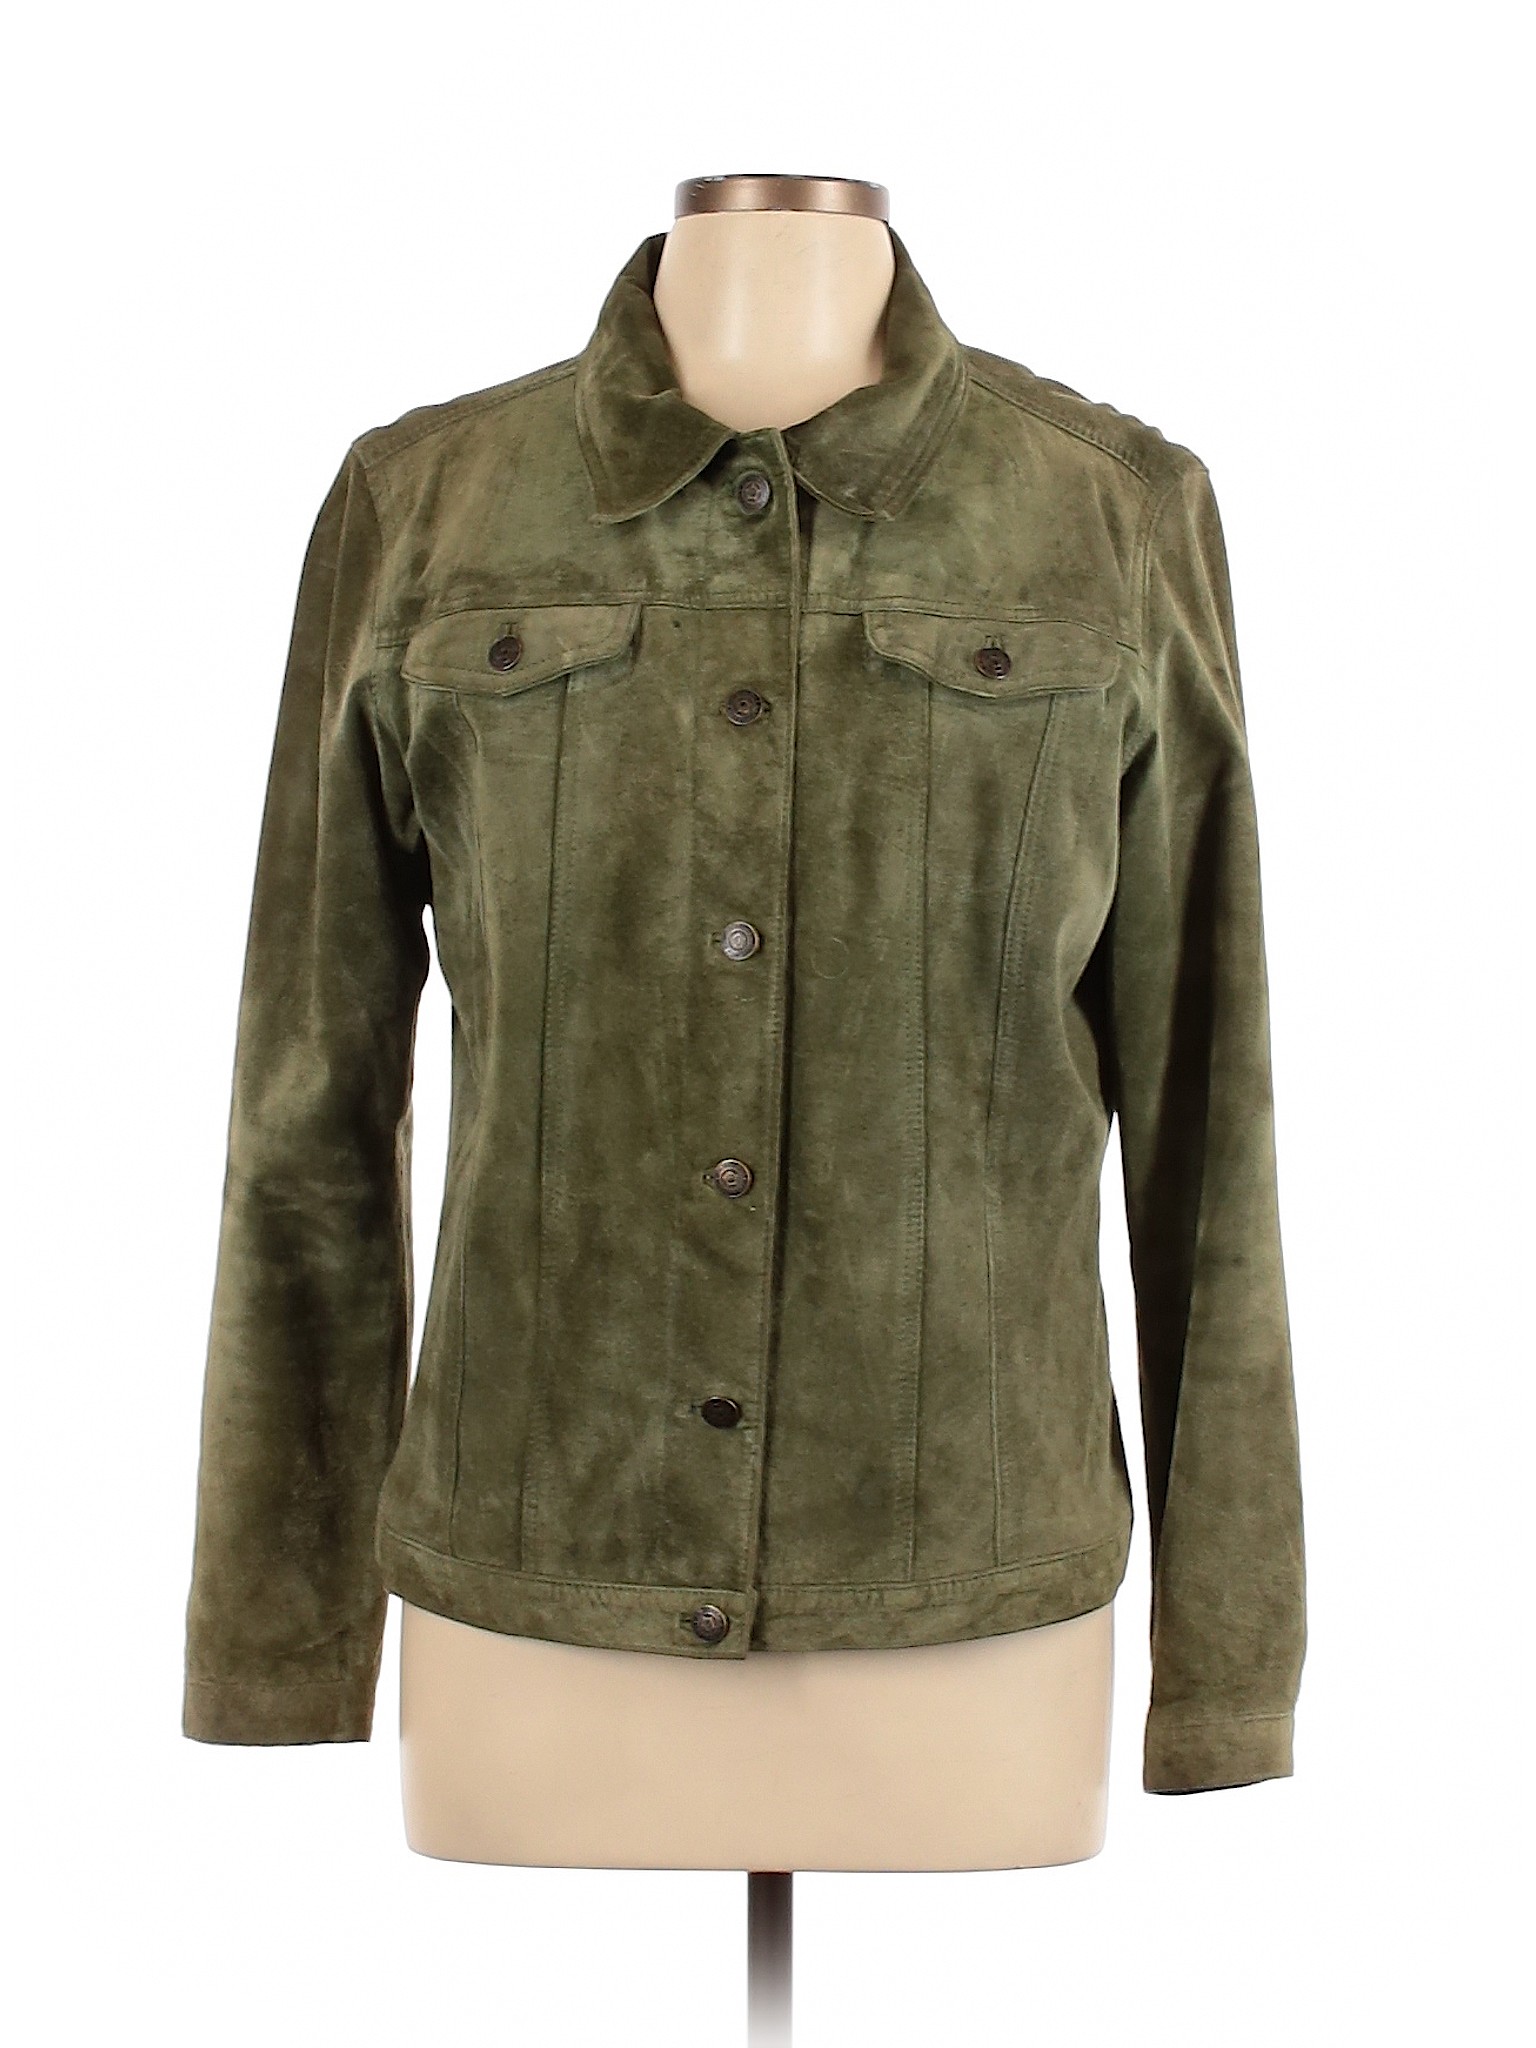 For Joseph 100% Suede Solid Green Leather Jacket Size L - 63% off | thredUP